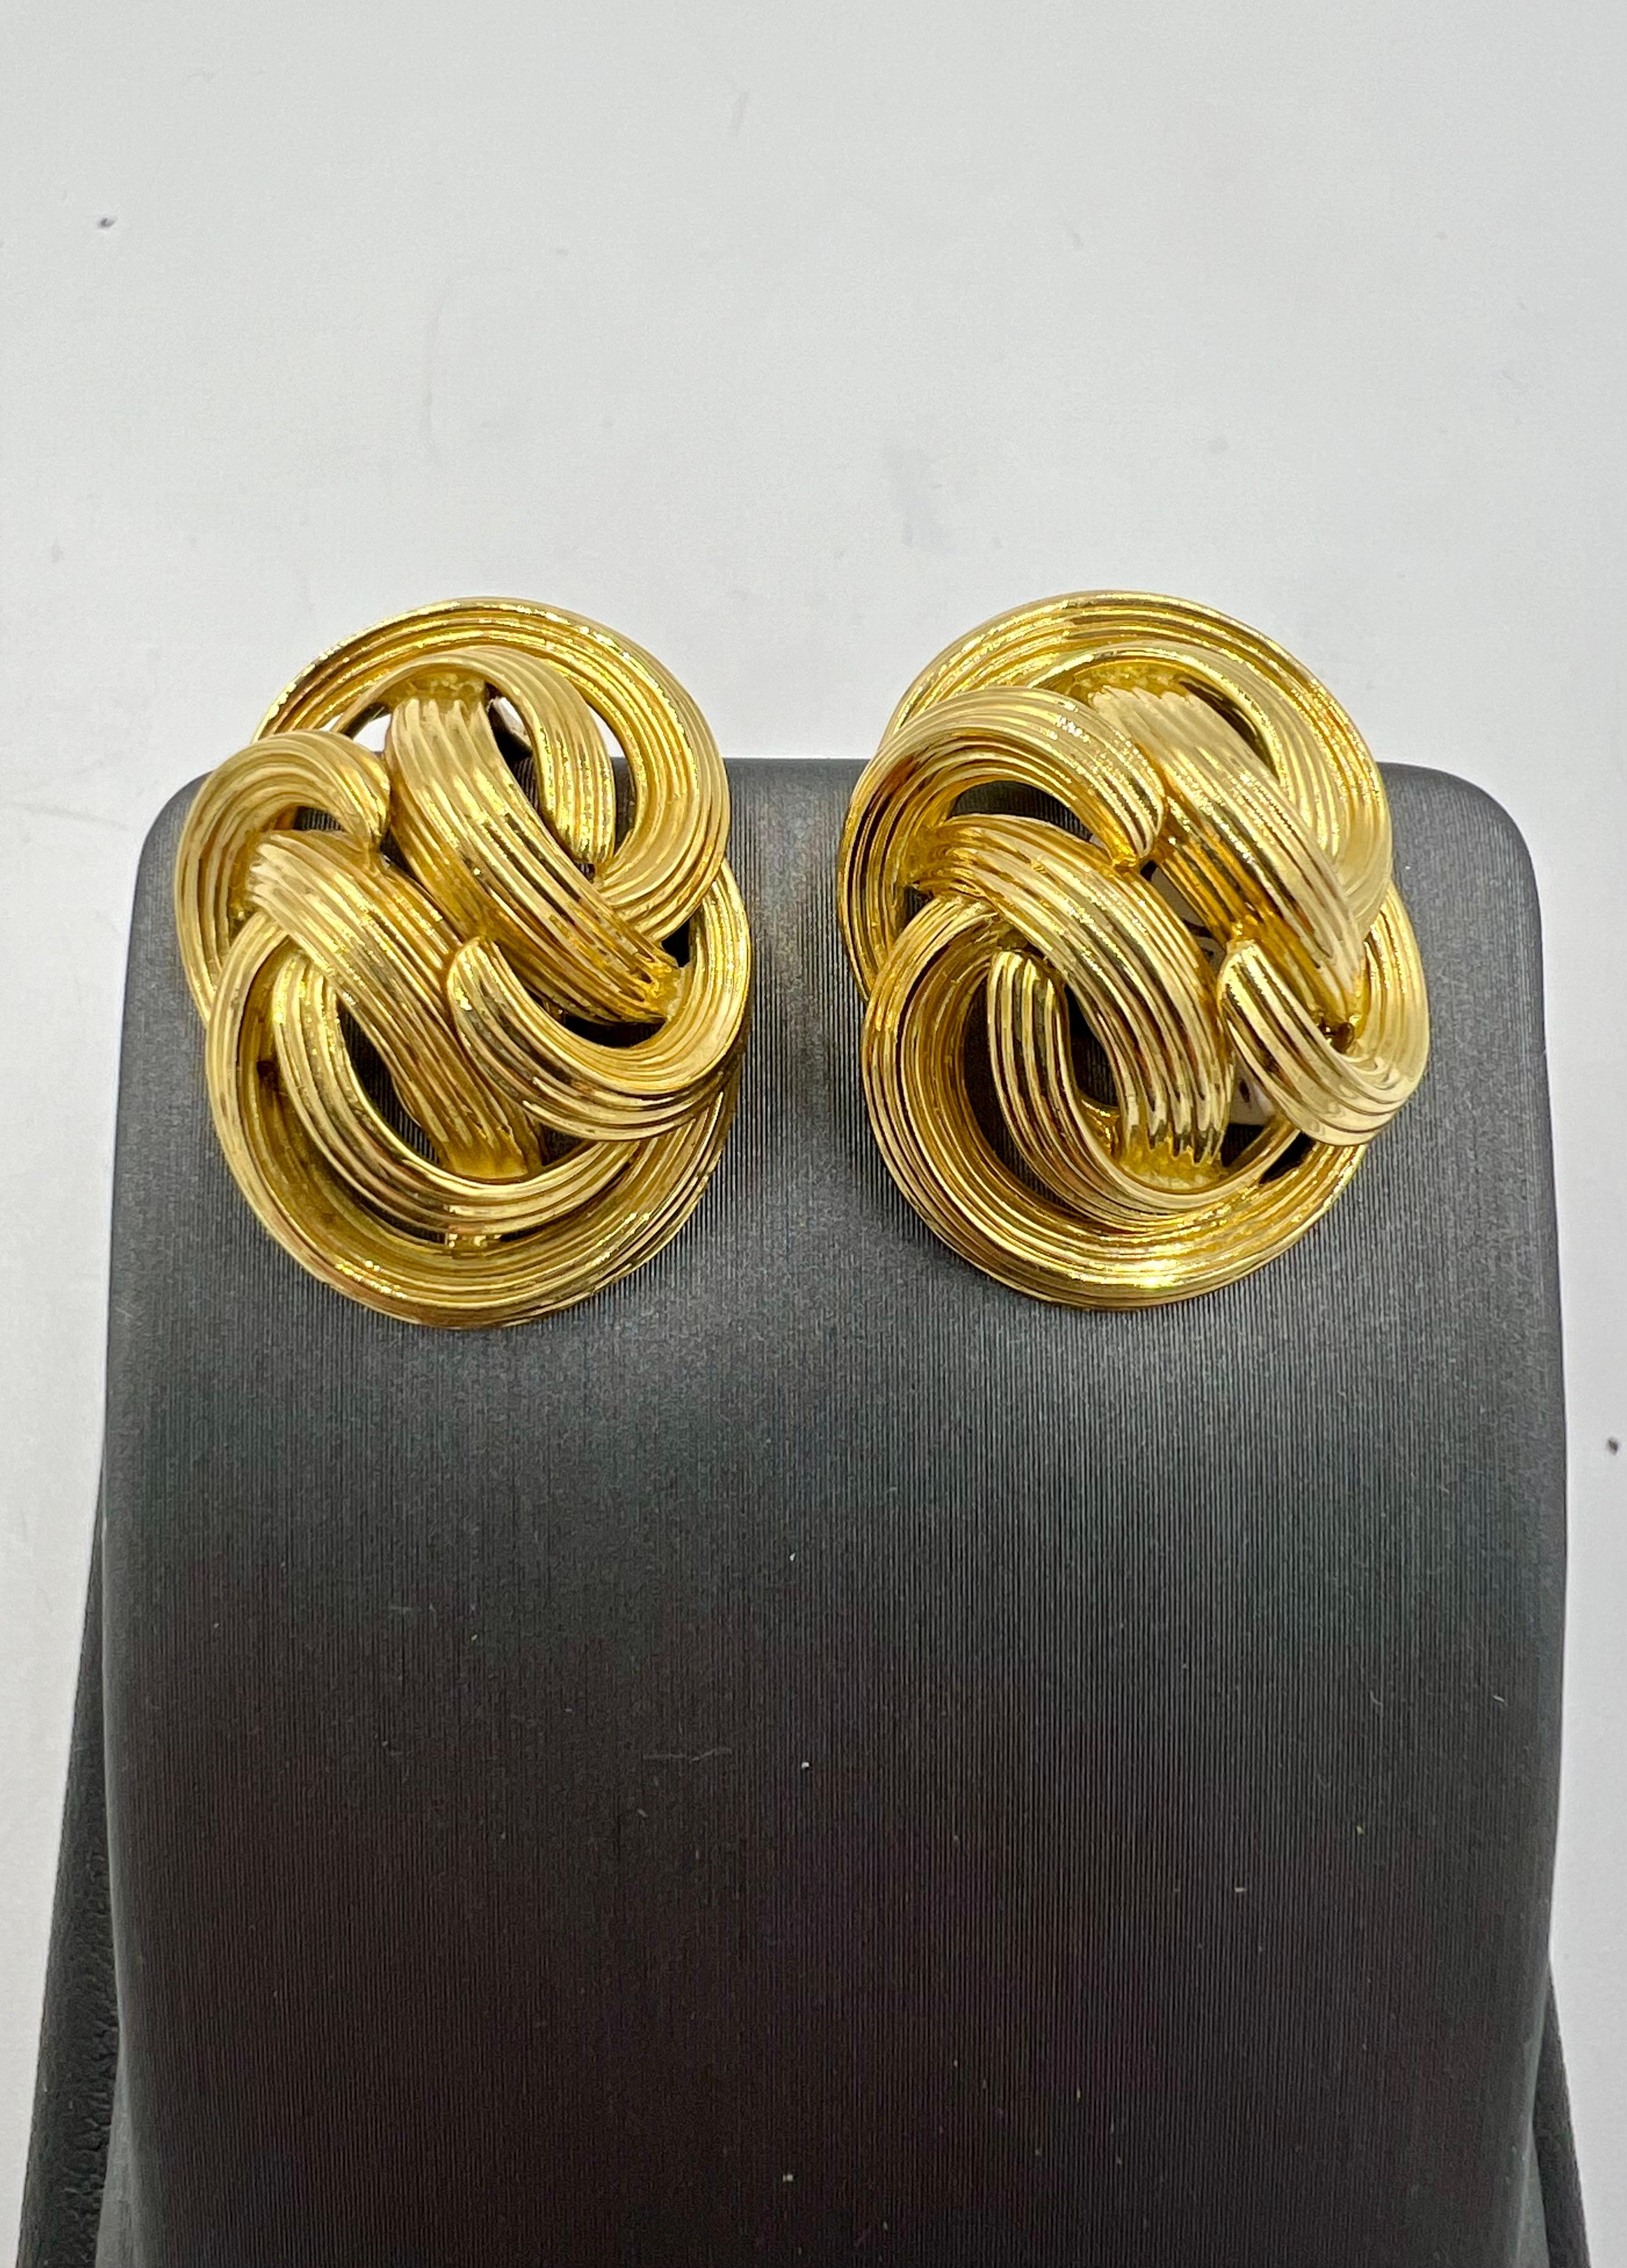 Tiffany fluted yellow god clip-on earrings, circa 1980s

The Tiffany Fluted Yellow Gold Clip-on Earrings are a timeless and elegant accessory that exudes sophistication and style. Crafted from luxurious yellow gold, these earrings feature a fluted